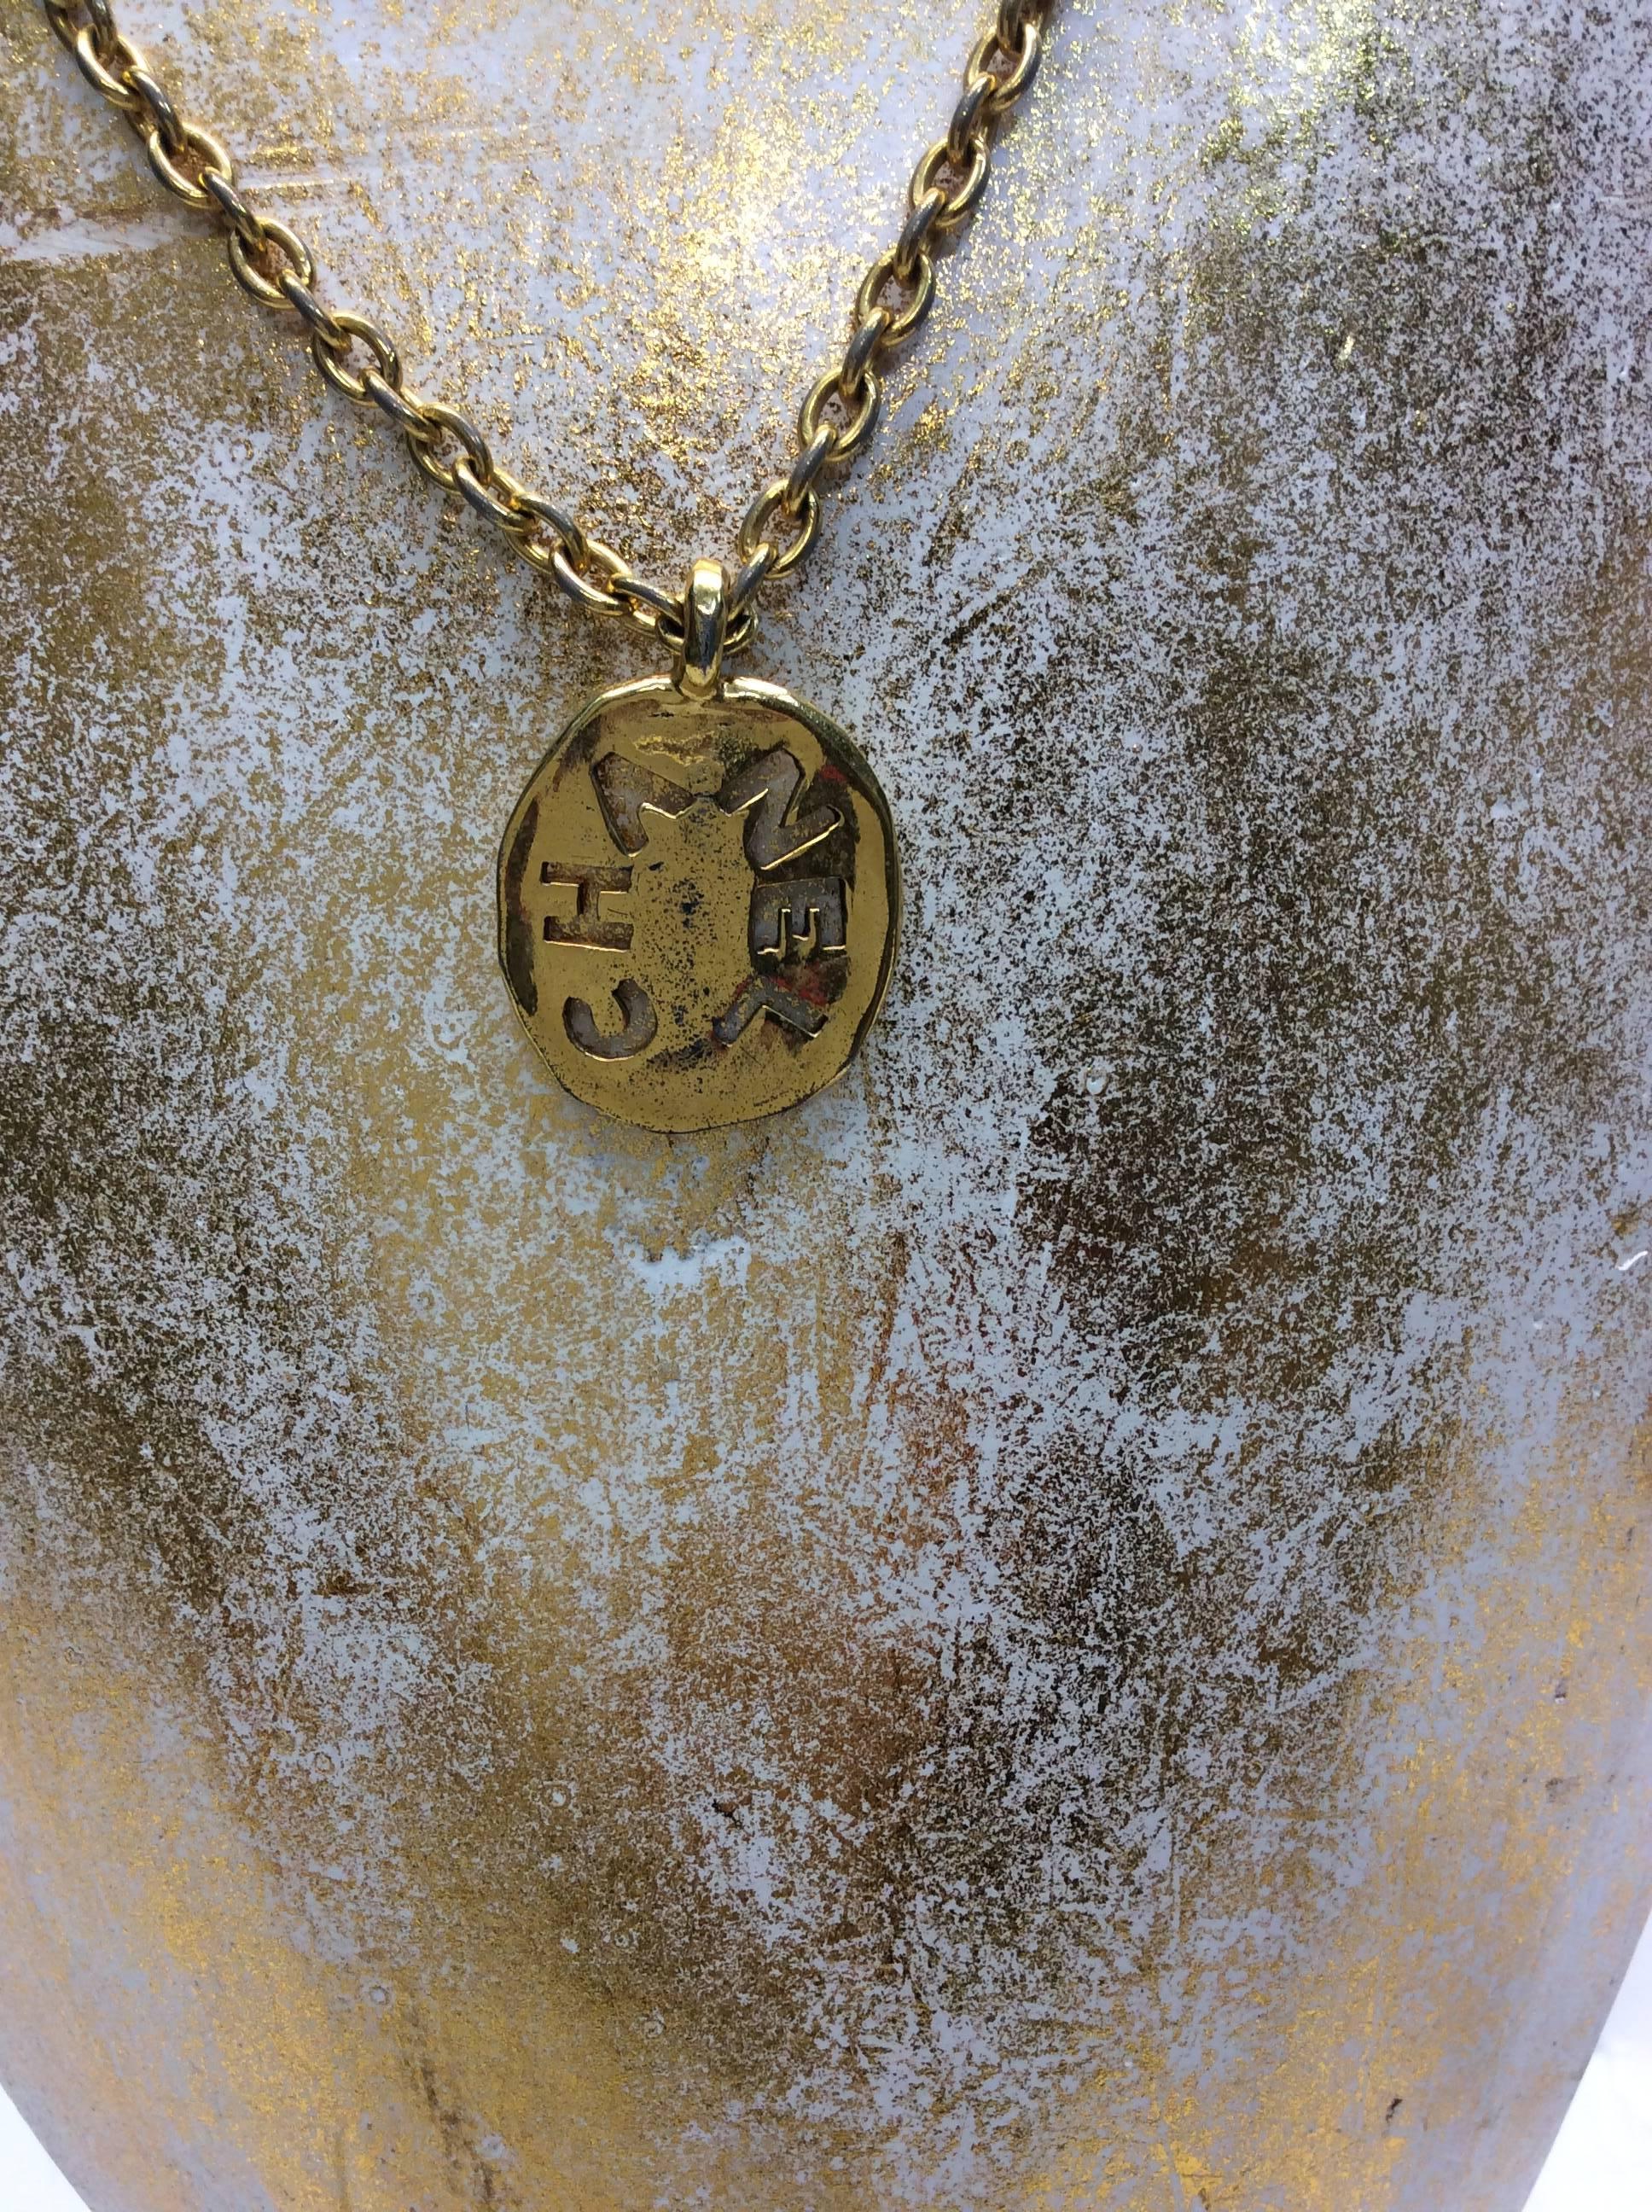 Chanel Gold Coin Pendant Necklace
$499
Made in France
Back clasp closure
15 inch strap drop
